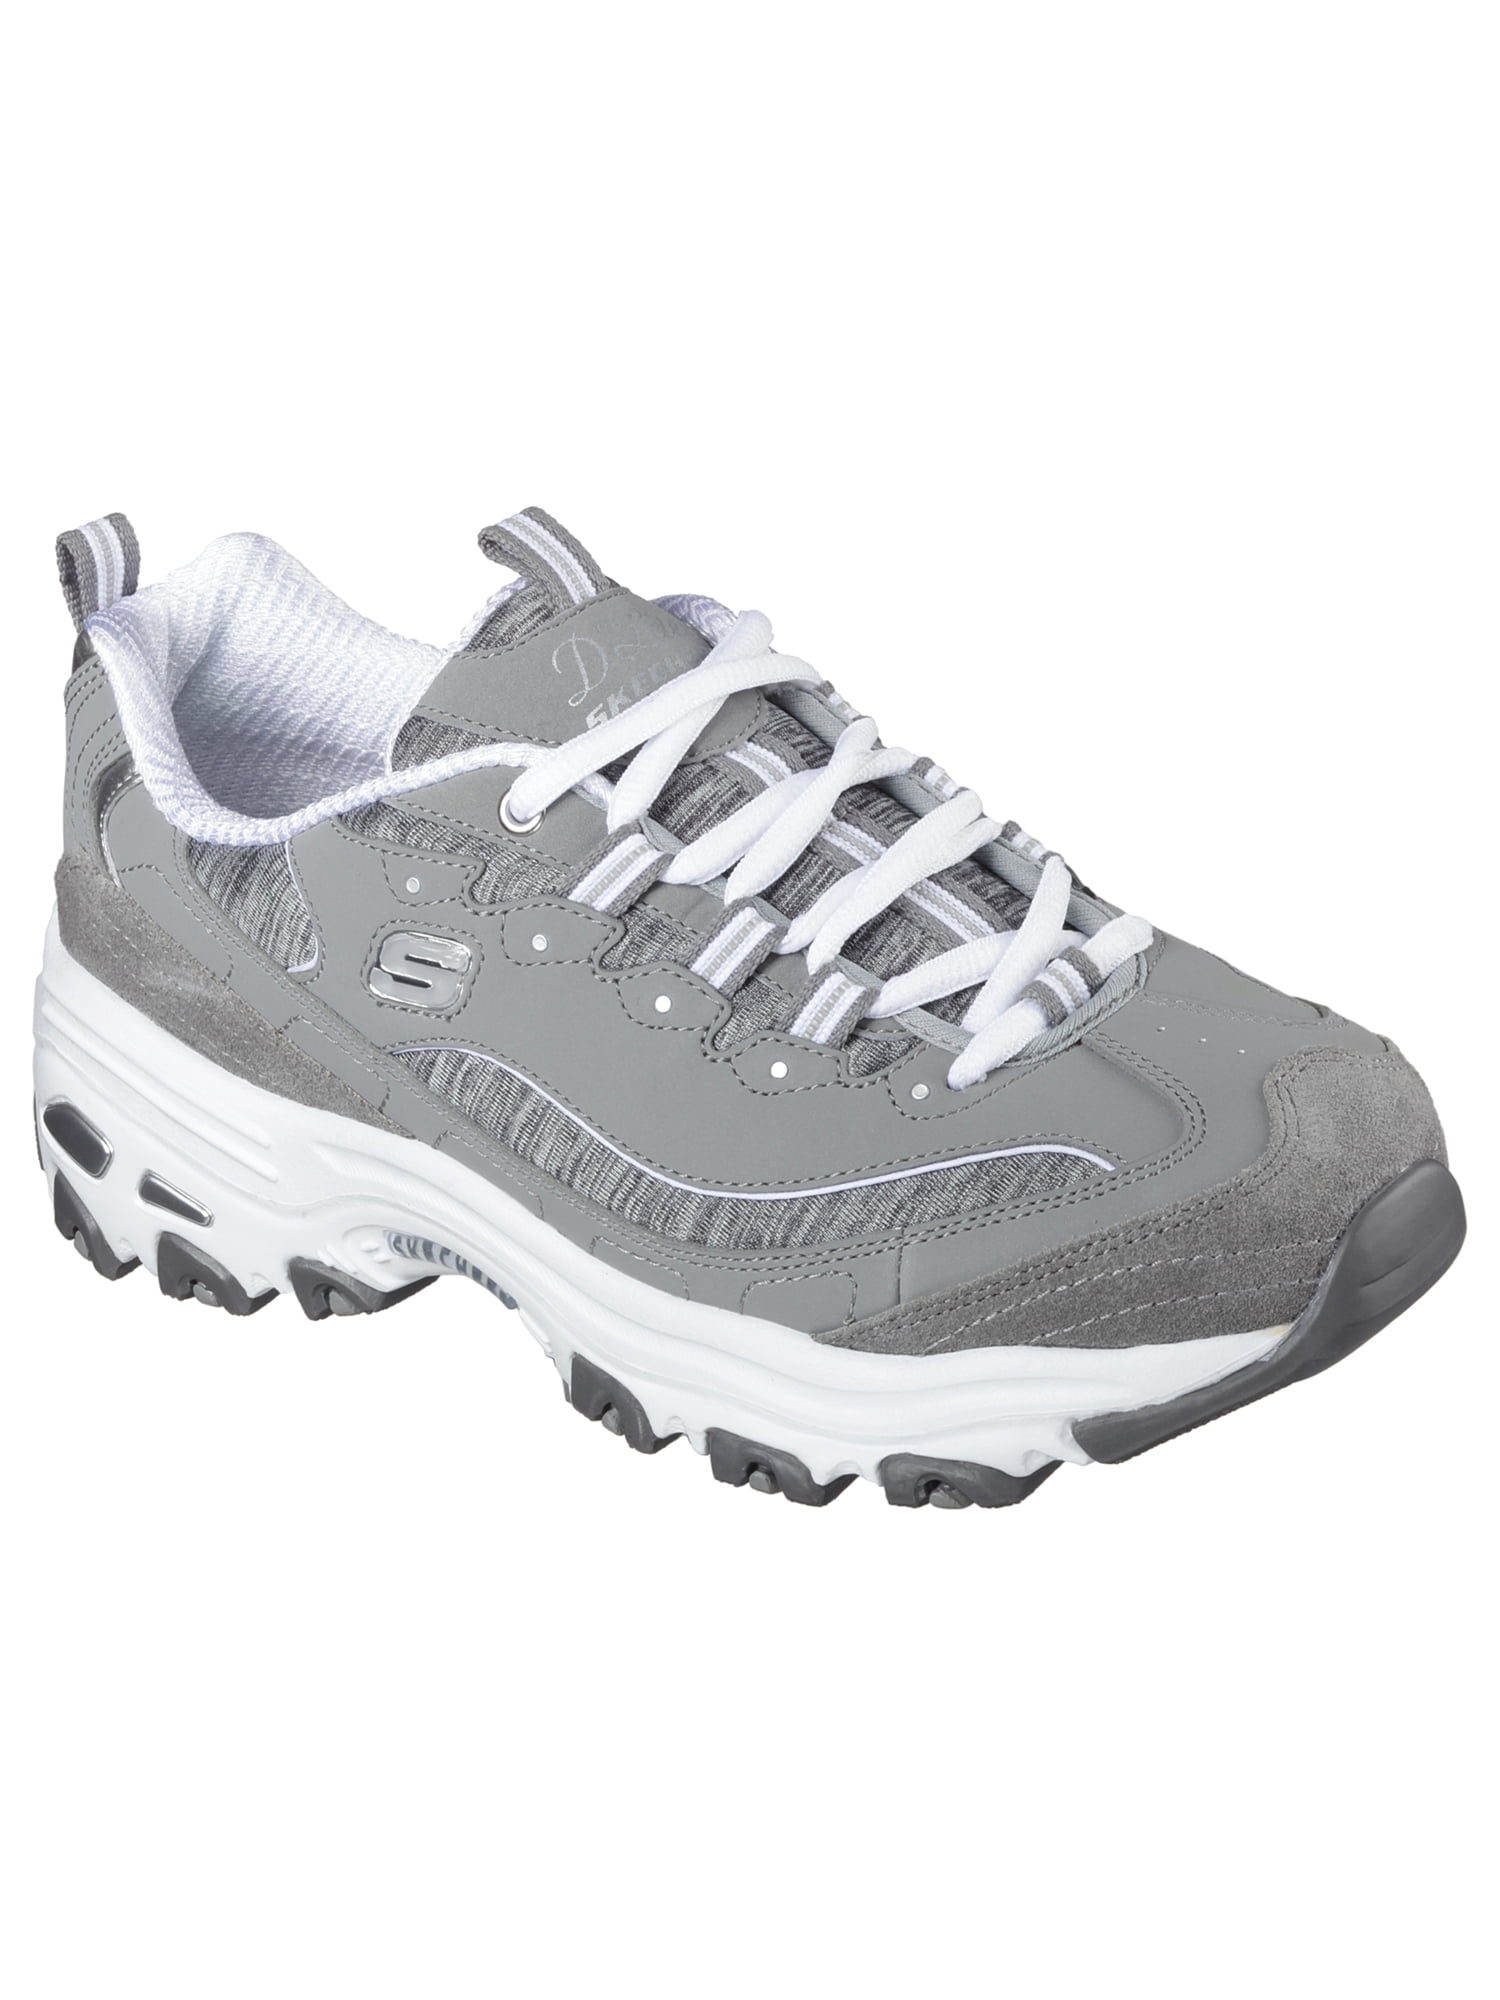 Buy Mens Sports Shoes without Laces Online at Liberty